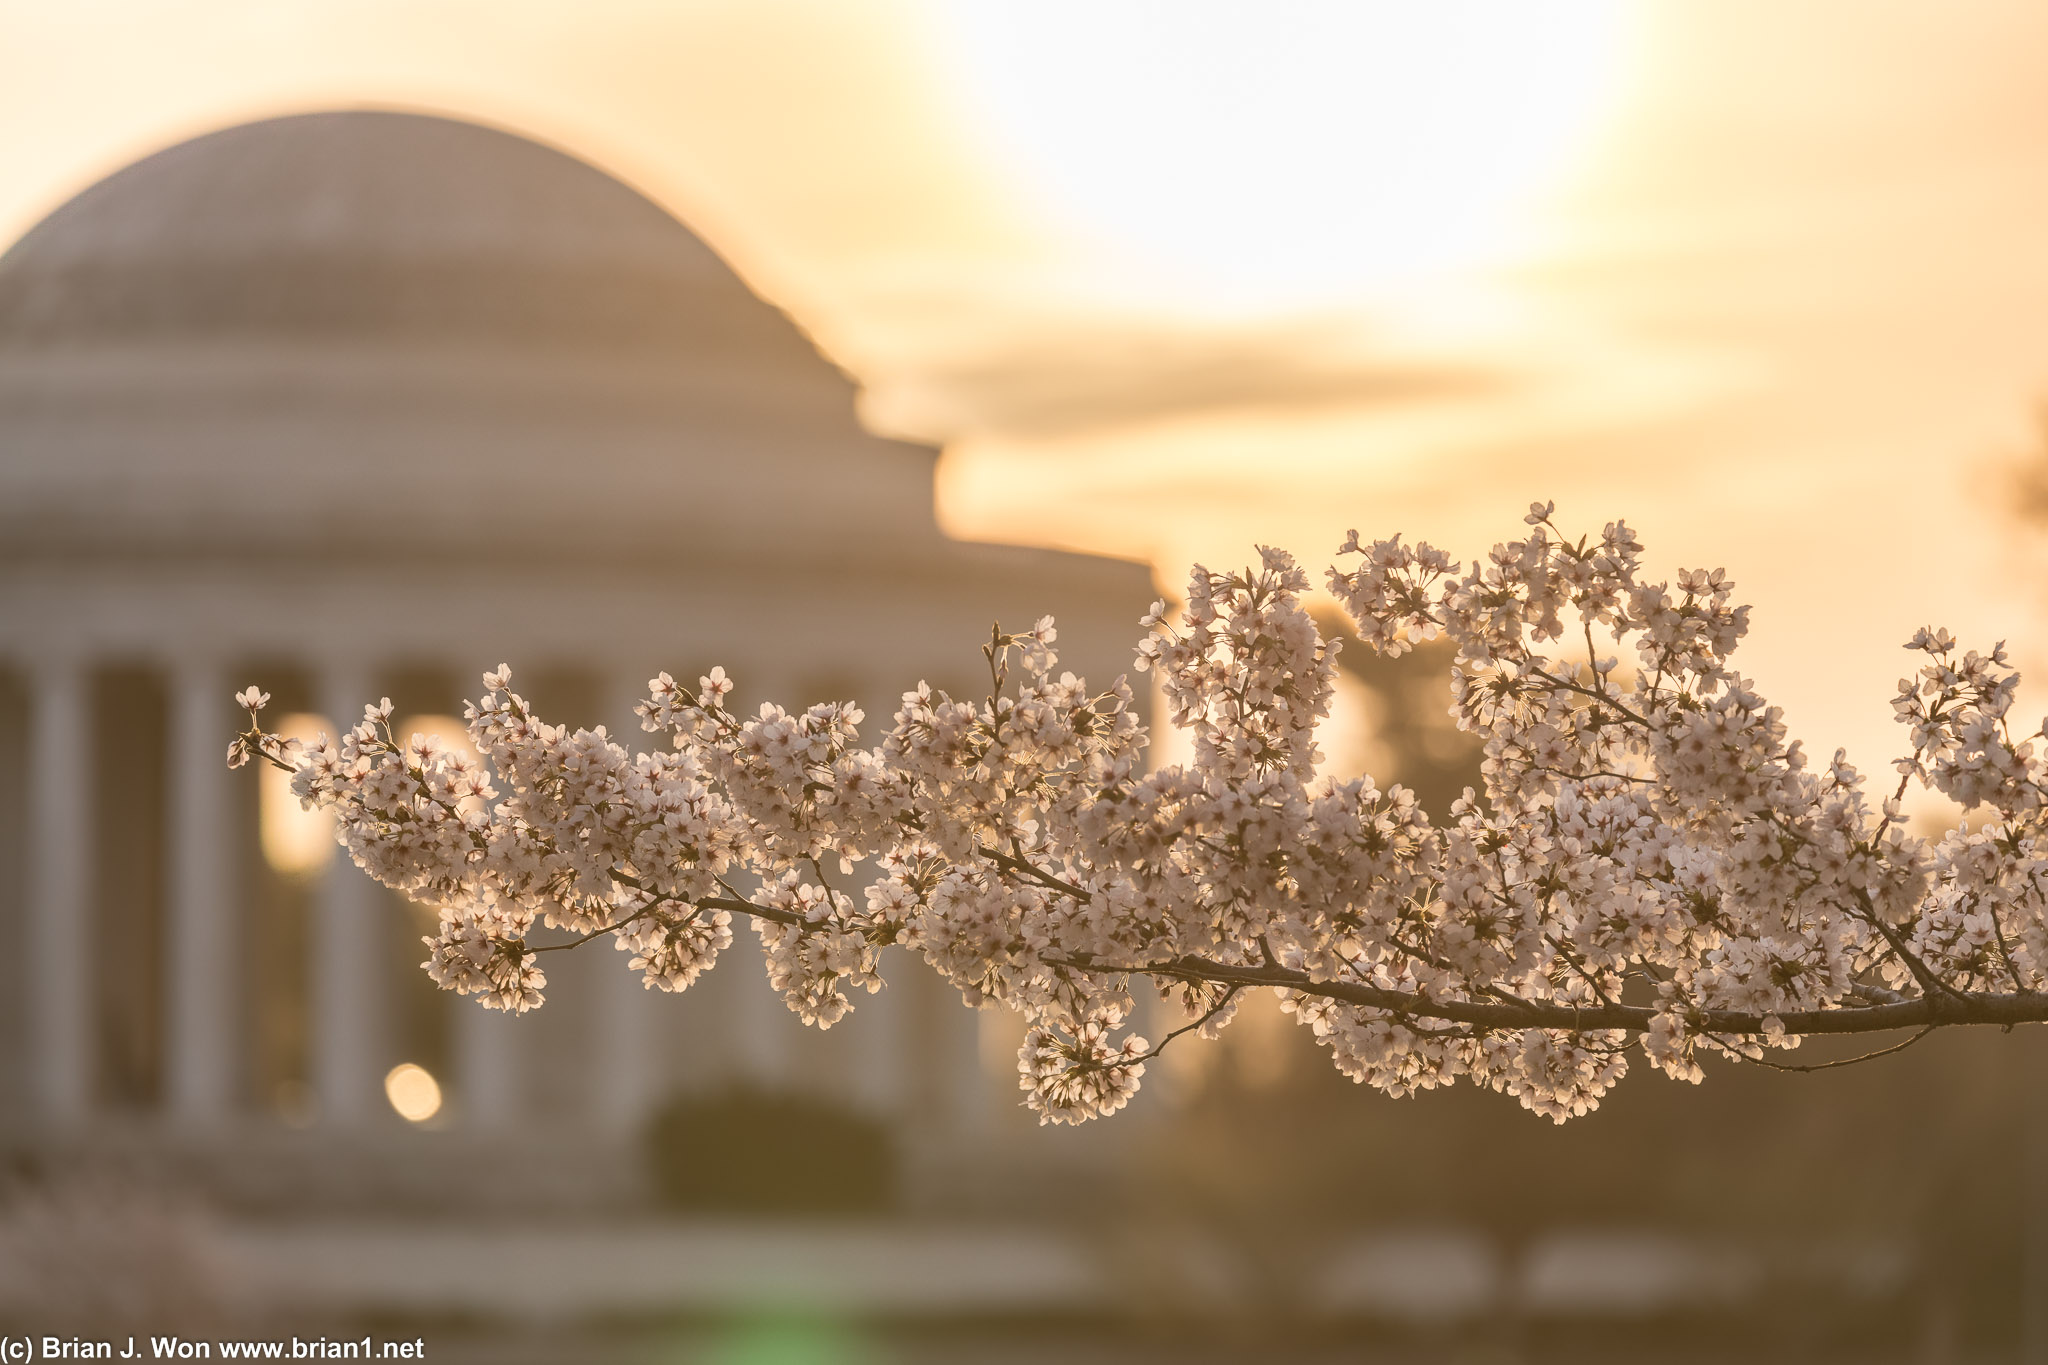 Dramatic skies shine on a lone branch full of blossoms.